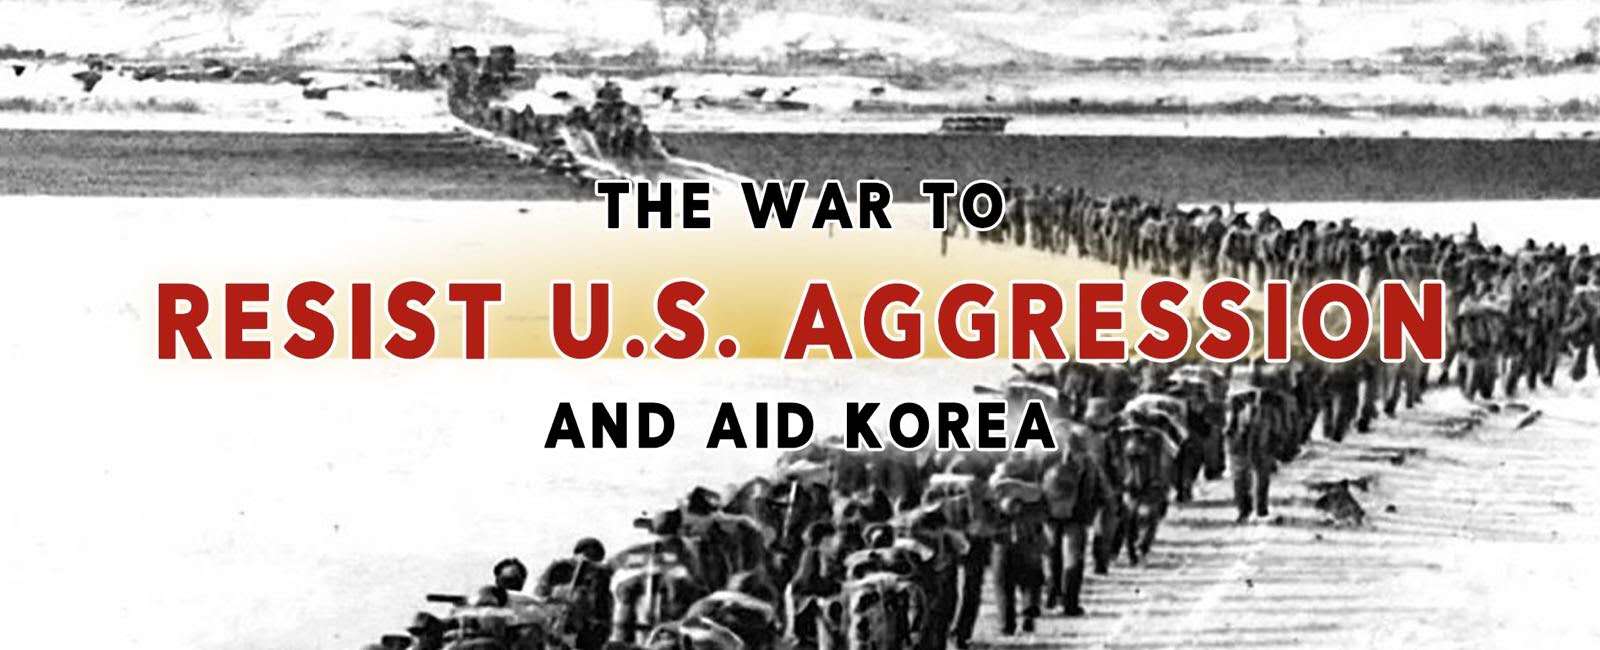 The War to Resist the U.S. Aggression and Aid Korea